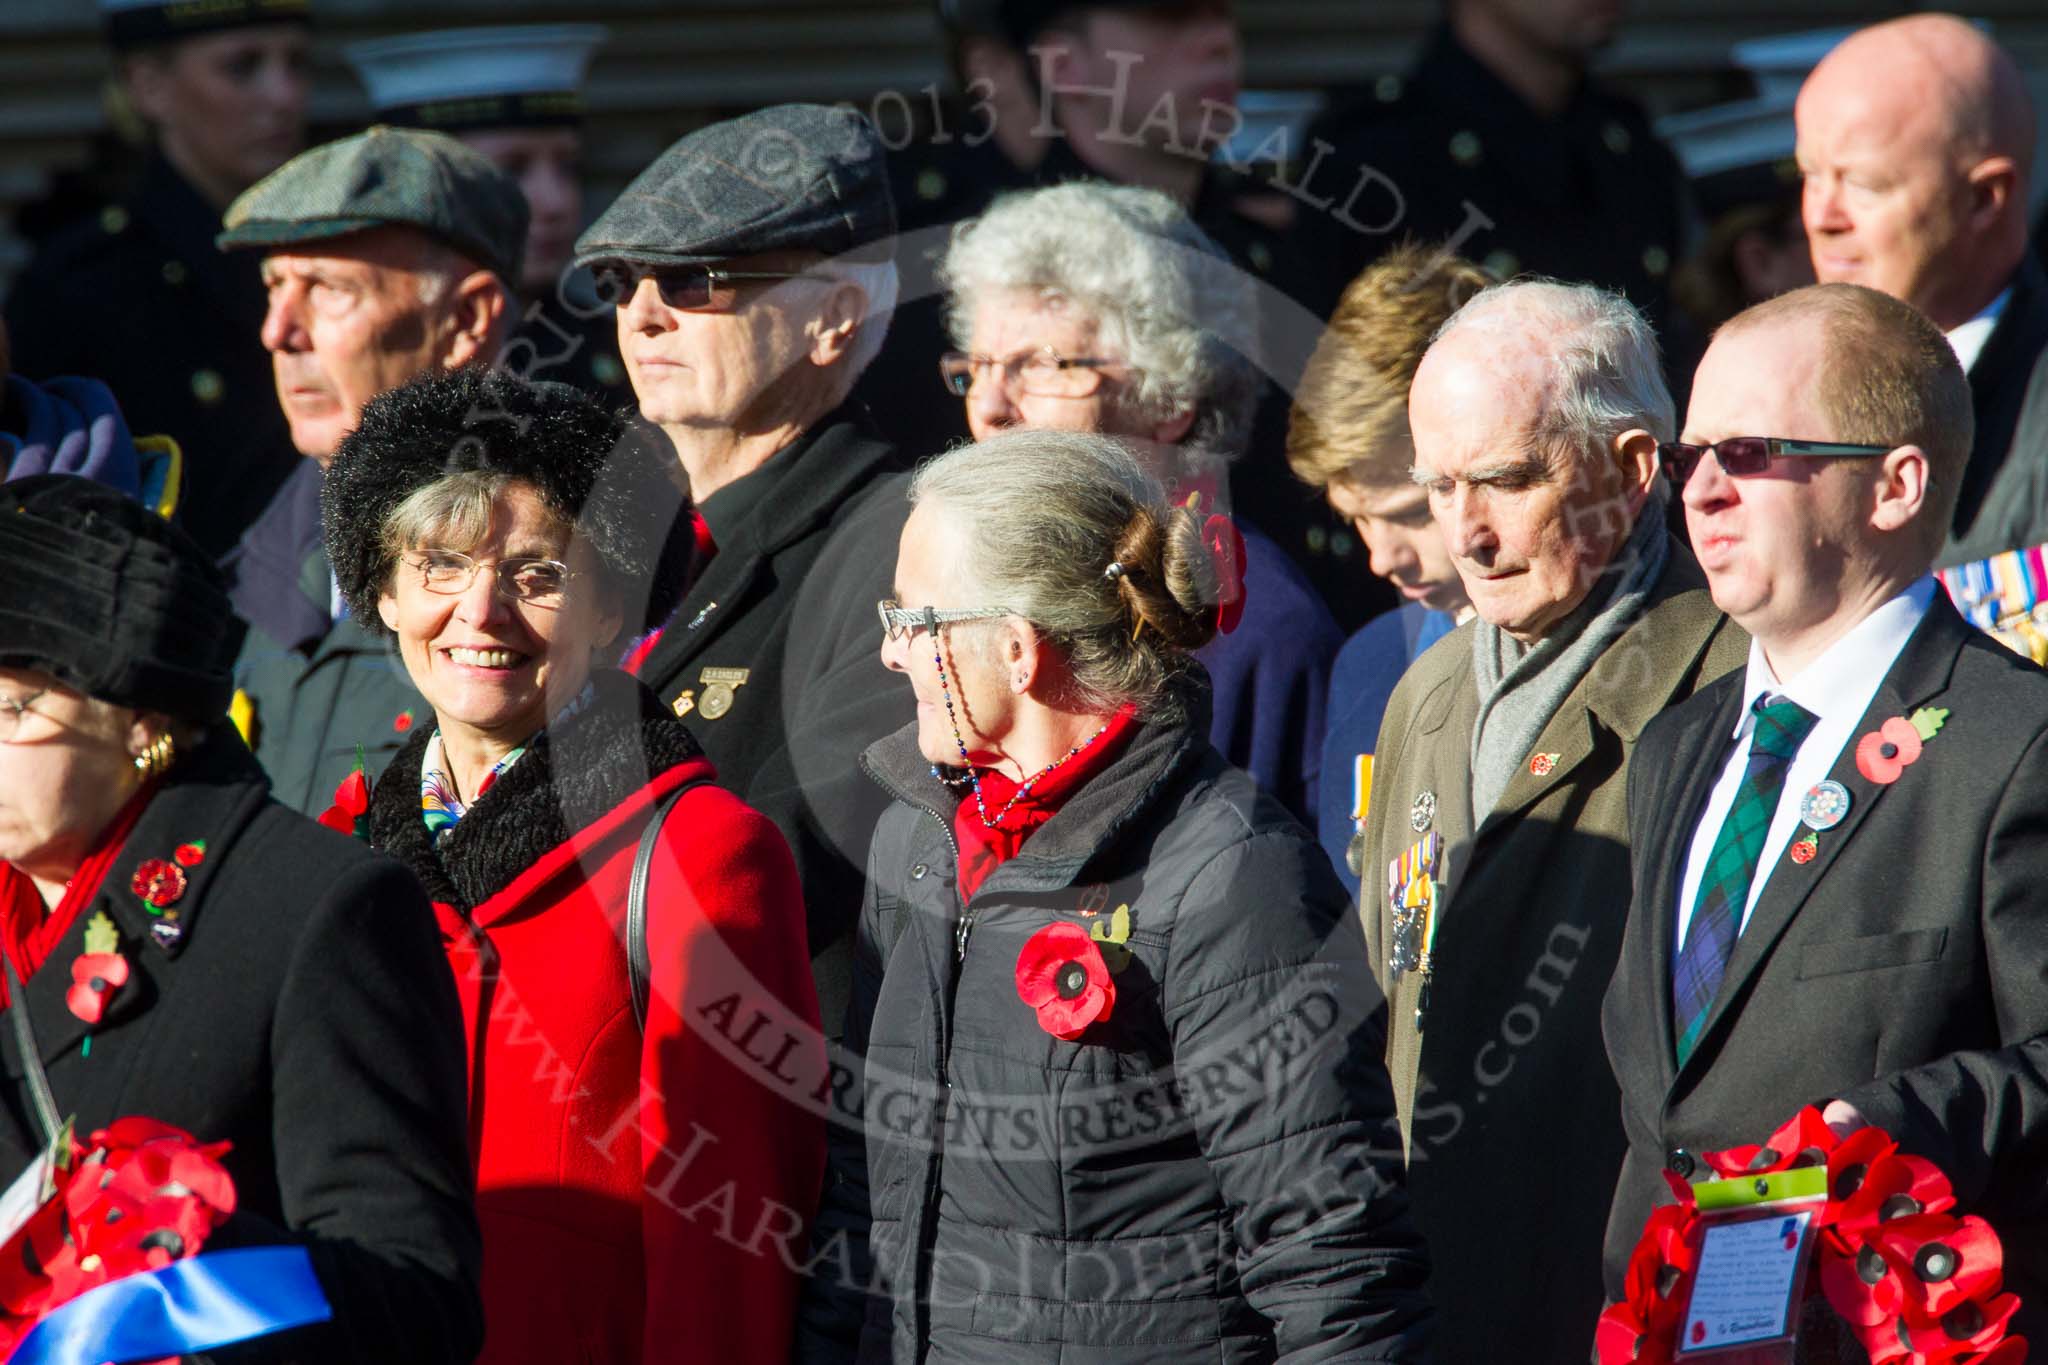 Remembrance Sunday at the Cenotaph in London 2014: Group M23 - Civilians Representing Families.
Press stand opposite the Foreign Office building, Whitehall, London SW1,
London,
Greater London,
United Kingdom,
on 09 November 2014 at 12:18, image #2150